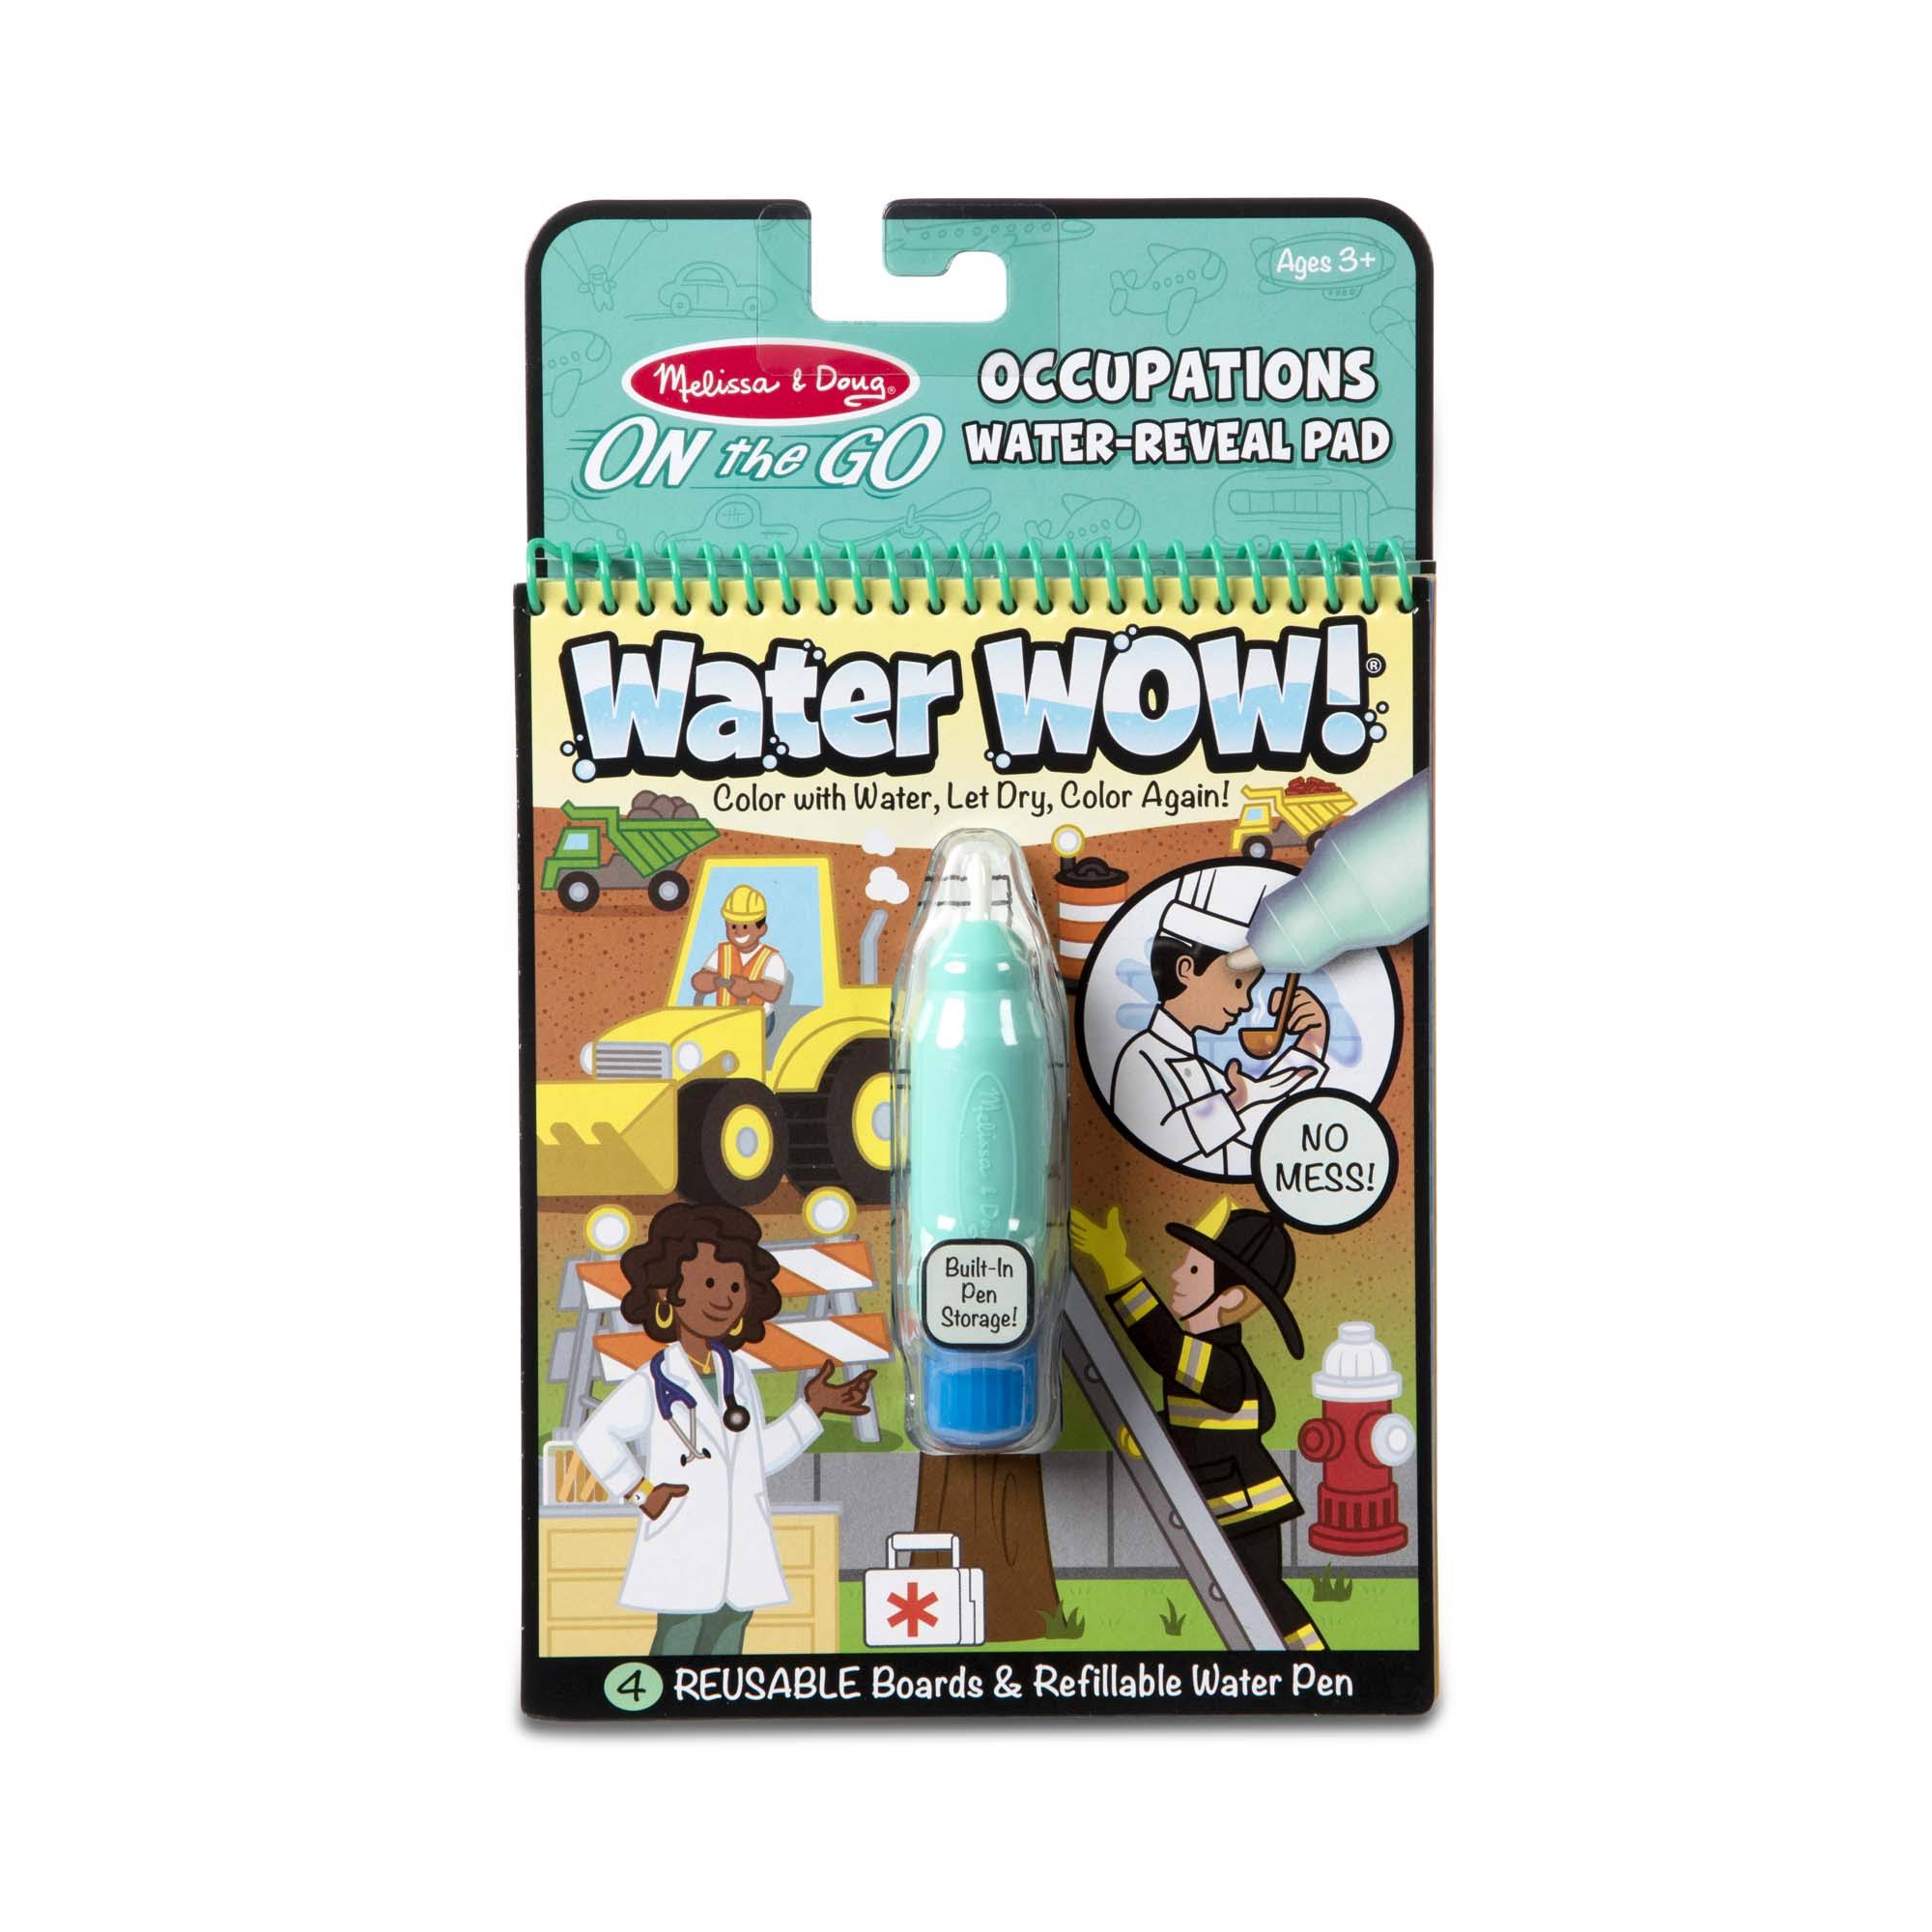 Melissa & Doug - on The Go Water Wow! Occupations